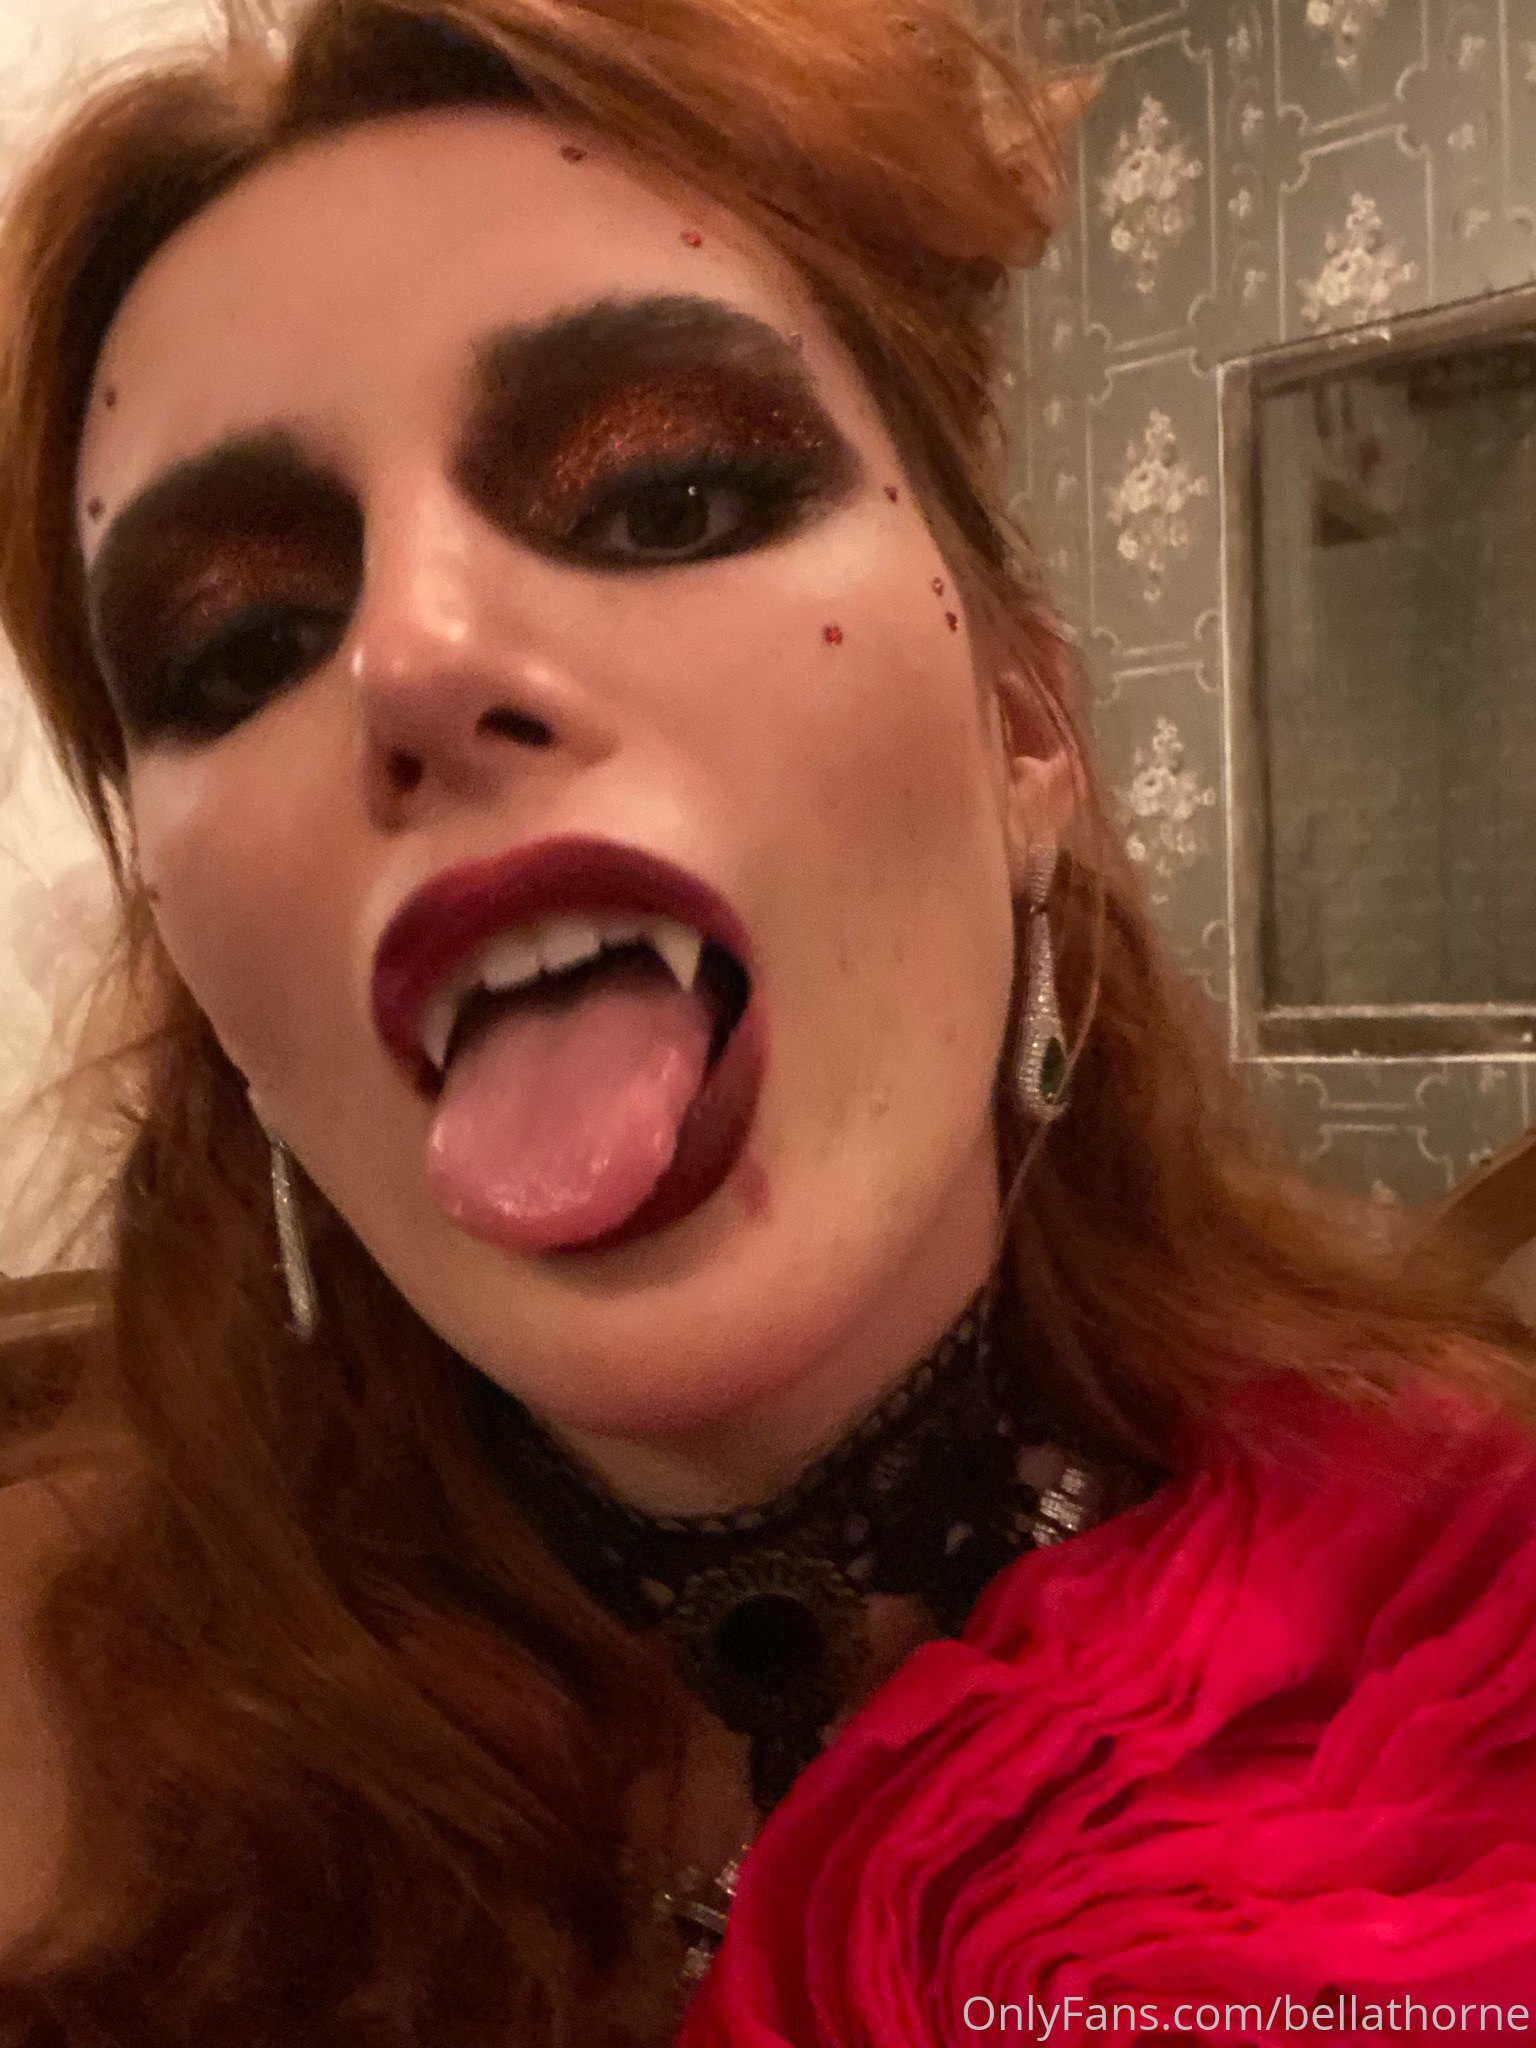 bella thorne onlyfans nude gallery leaked sorrymother.video 50